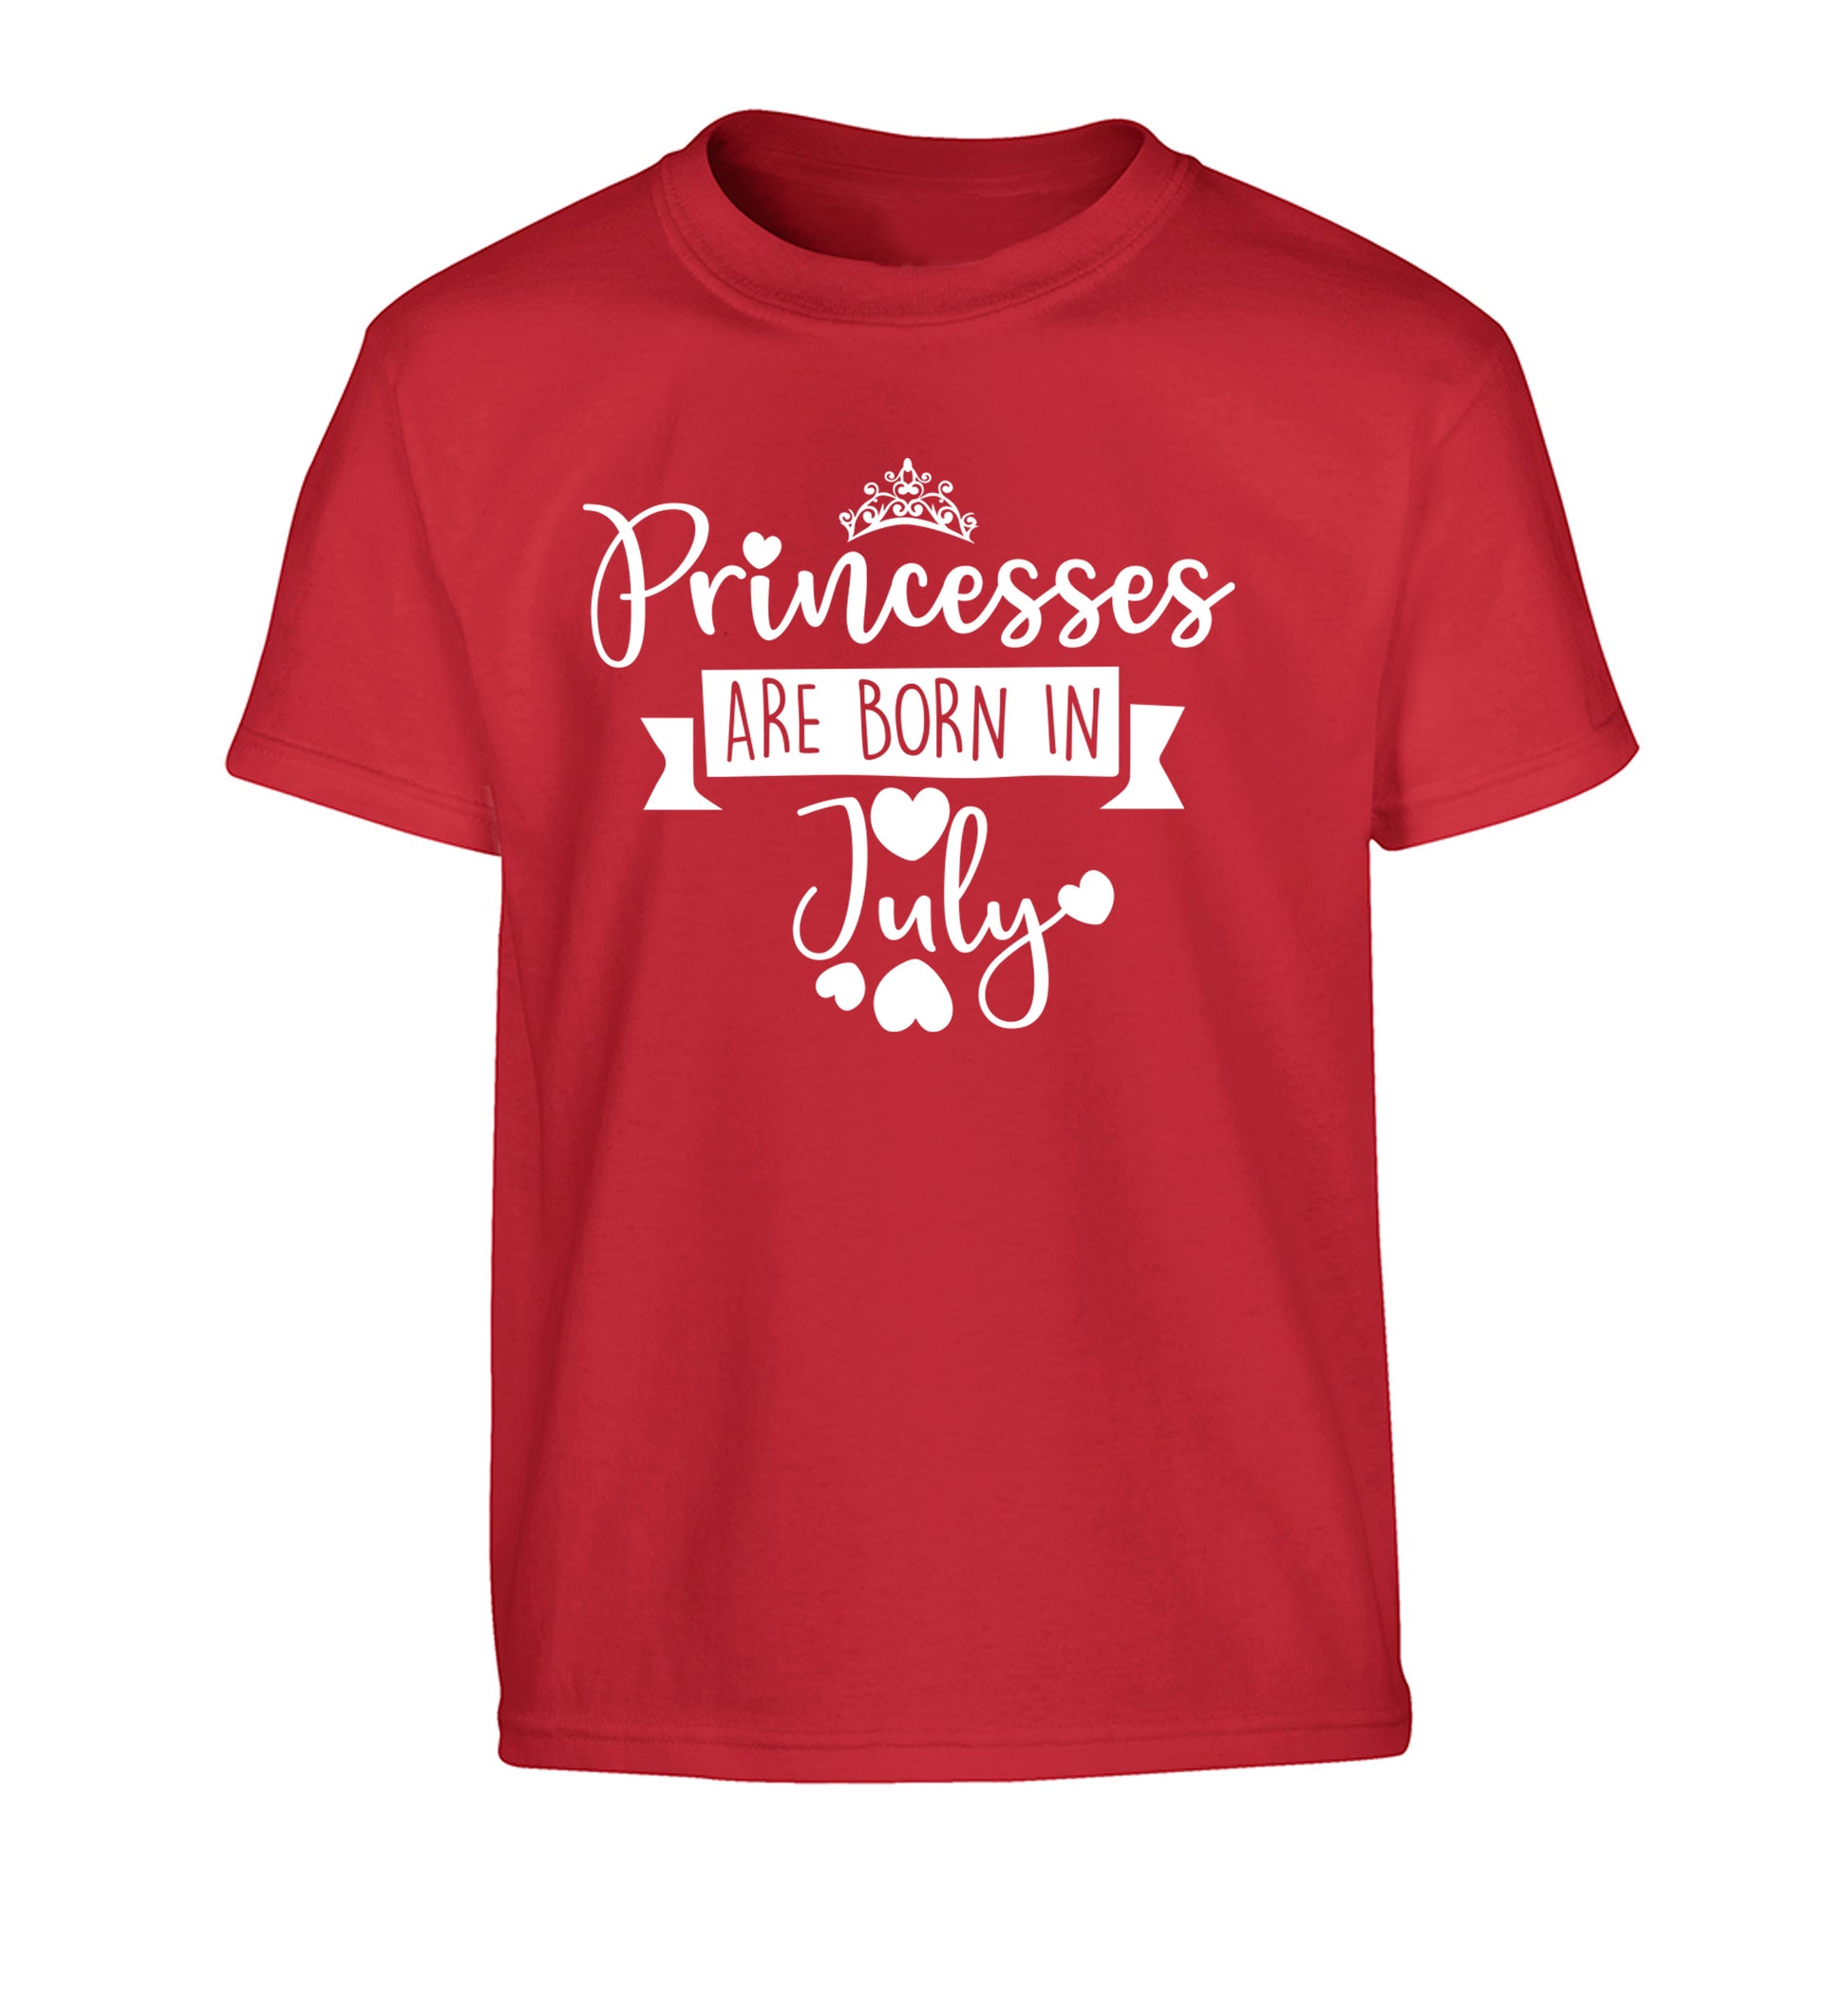 Princesses are born in July Children's red Tshirt 12-13 Years